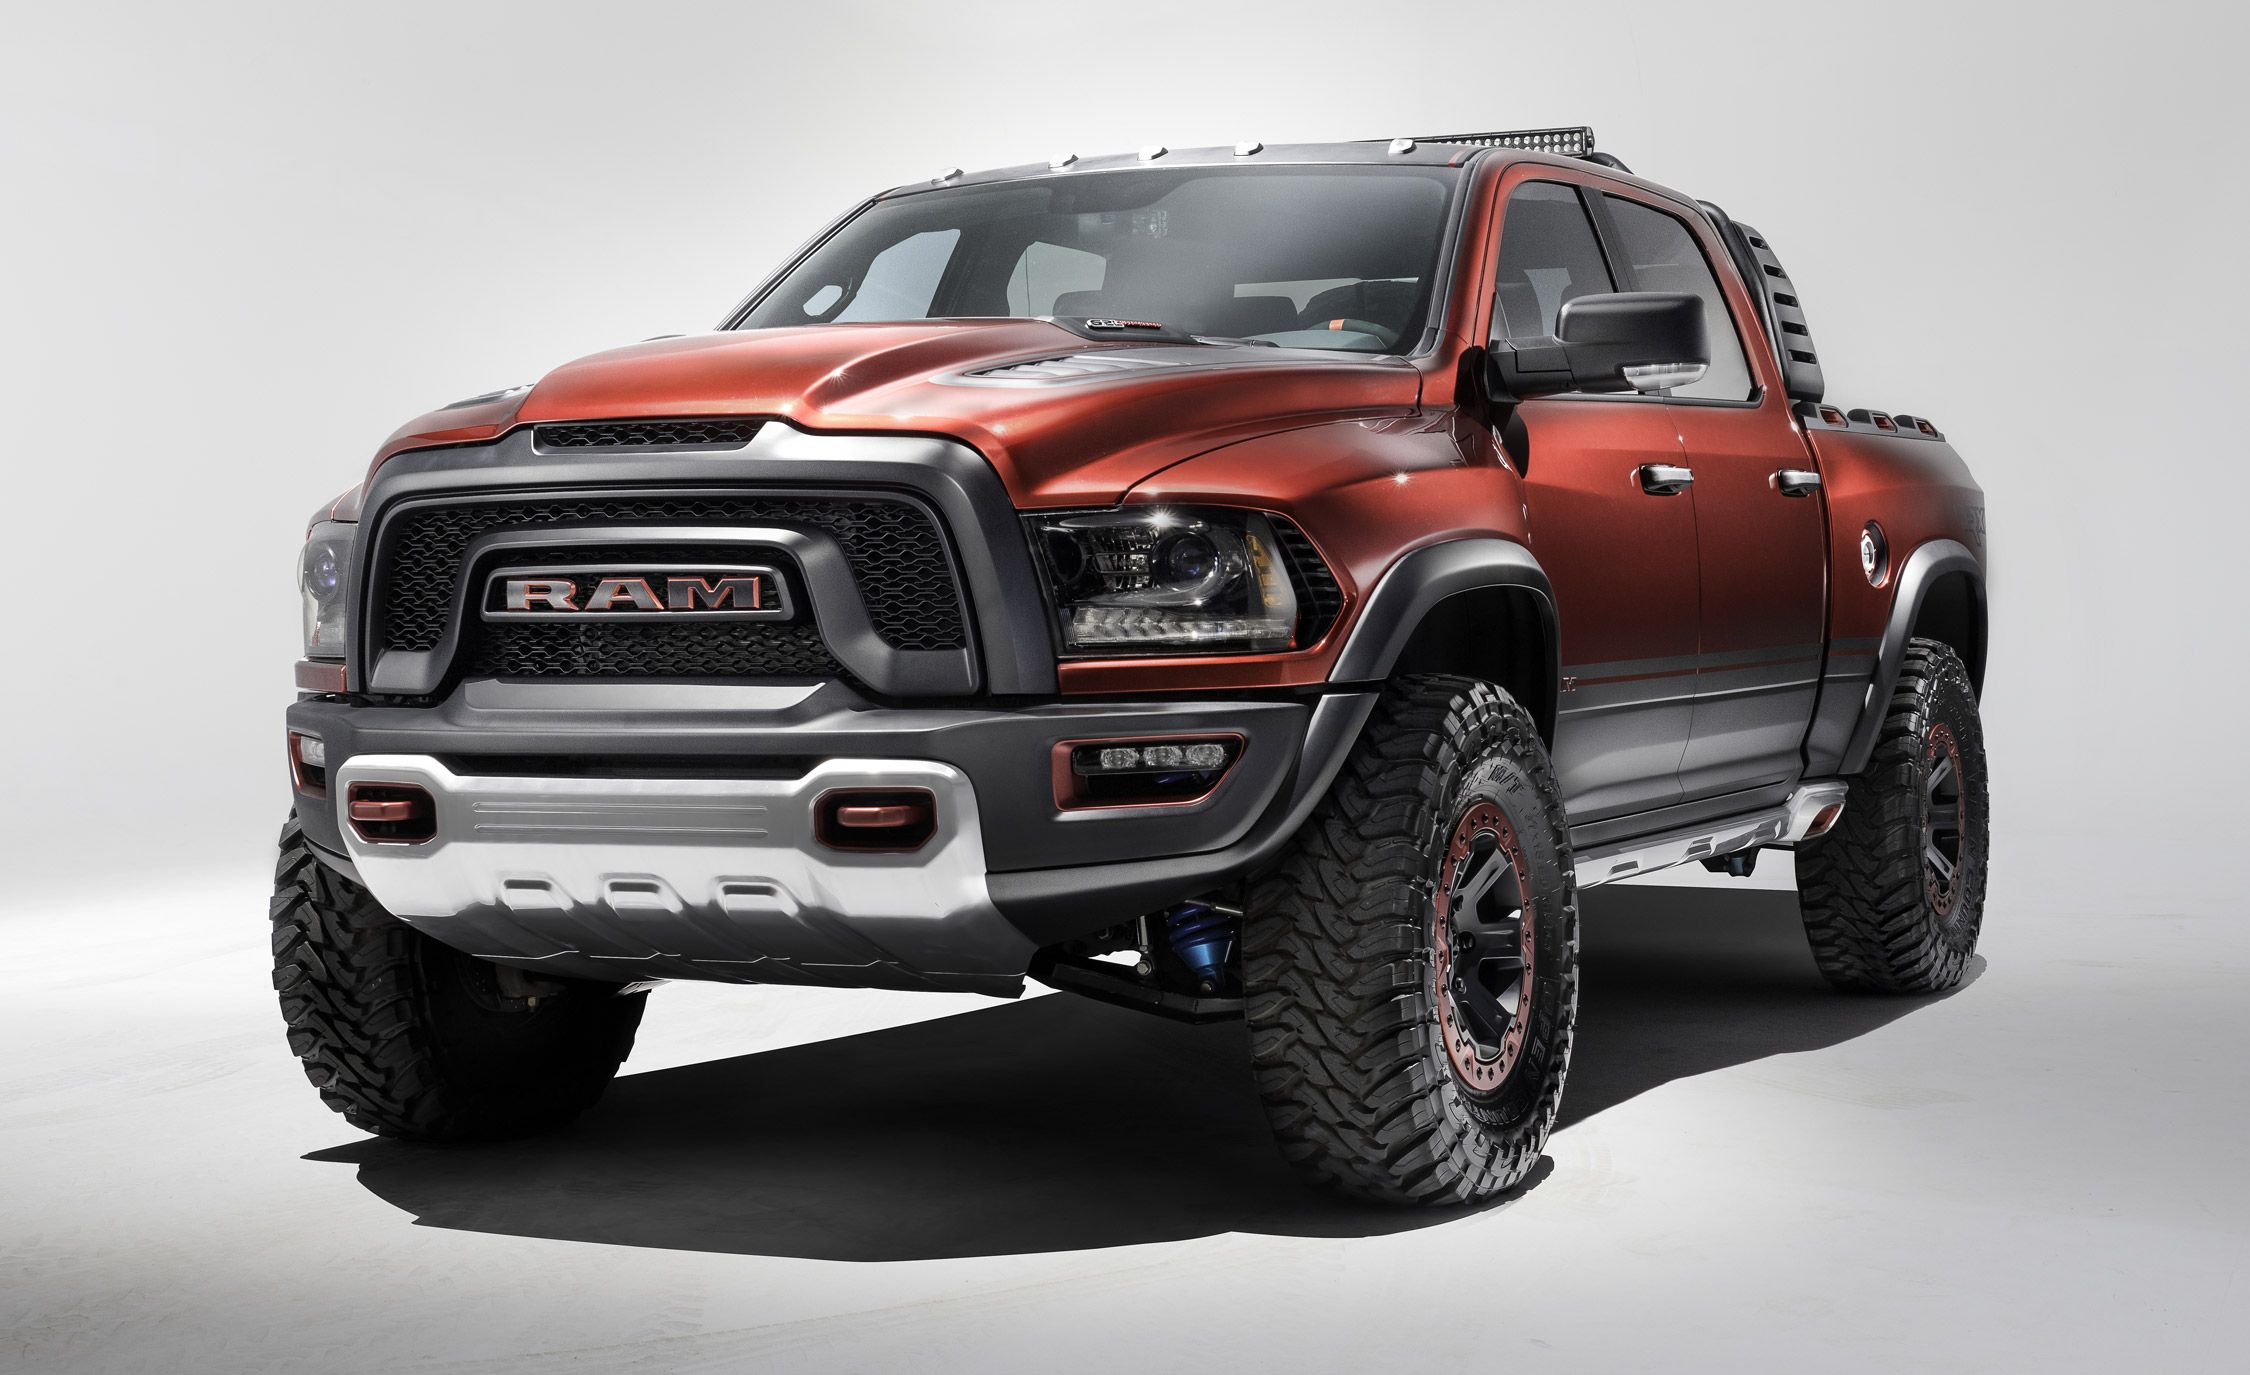 The 2018 Ram Rebel Is a Car Worth Waiting For | Feature | Car and Driver